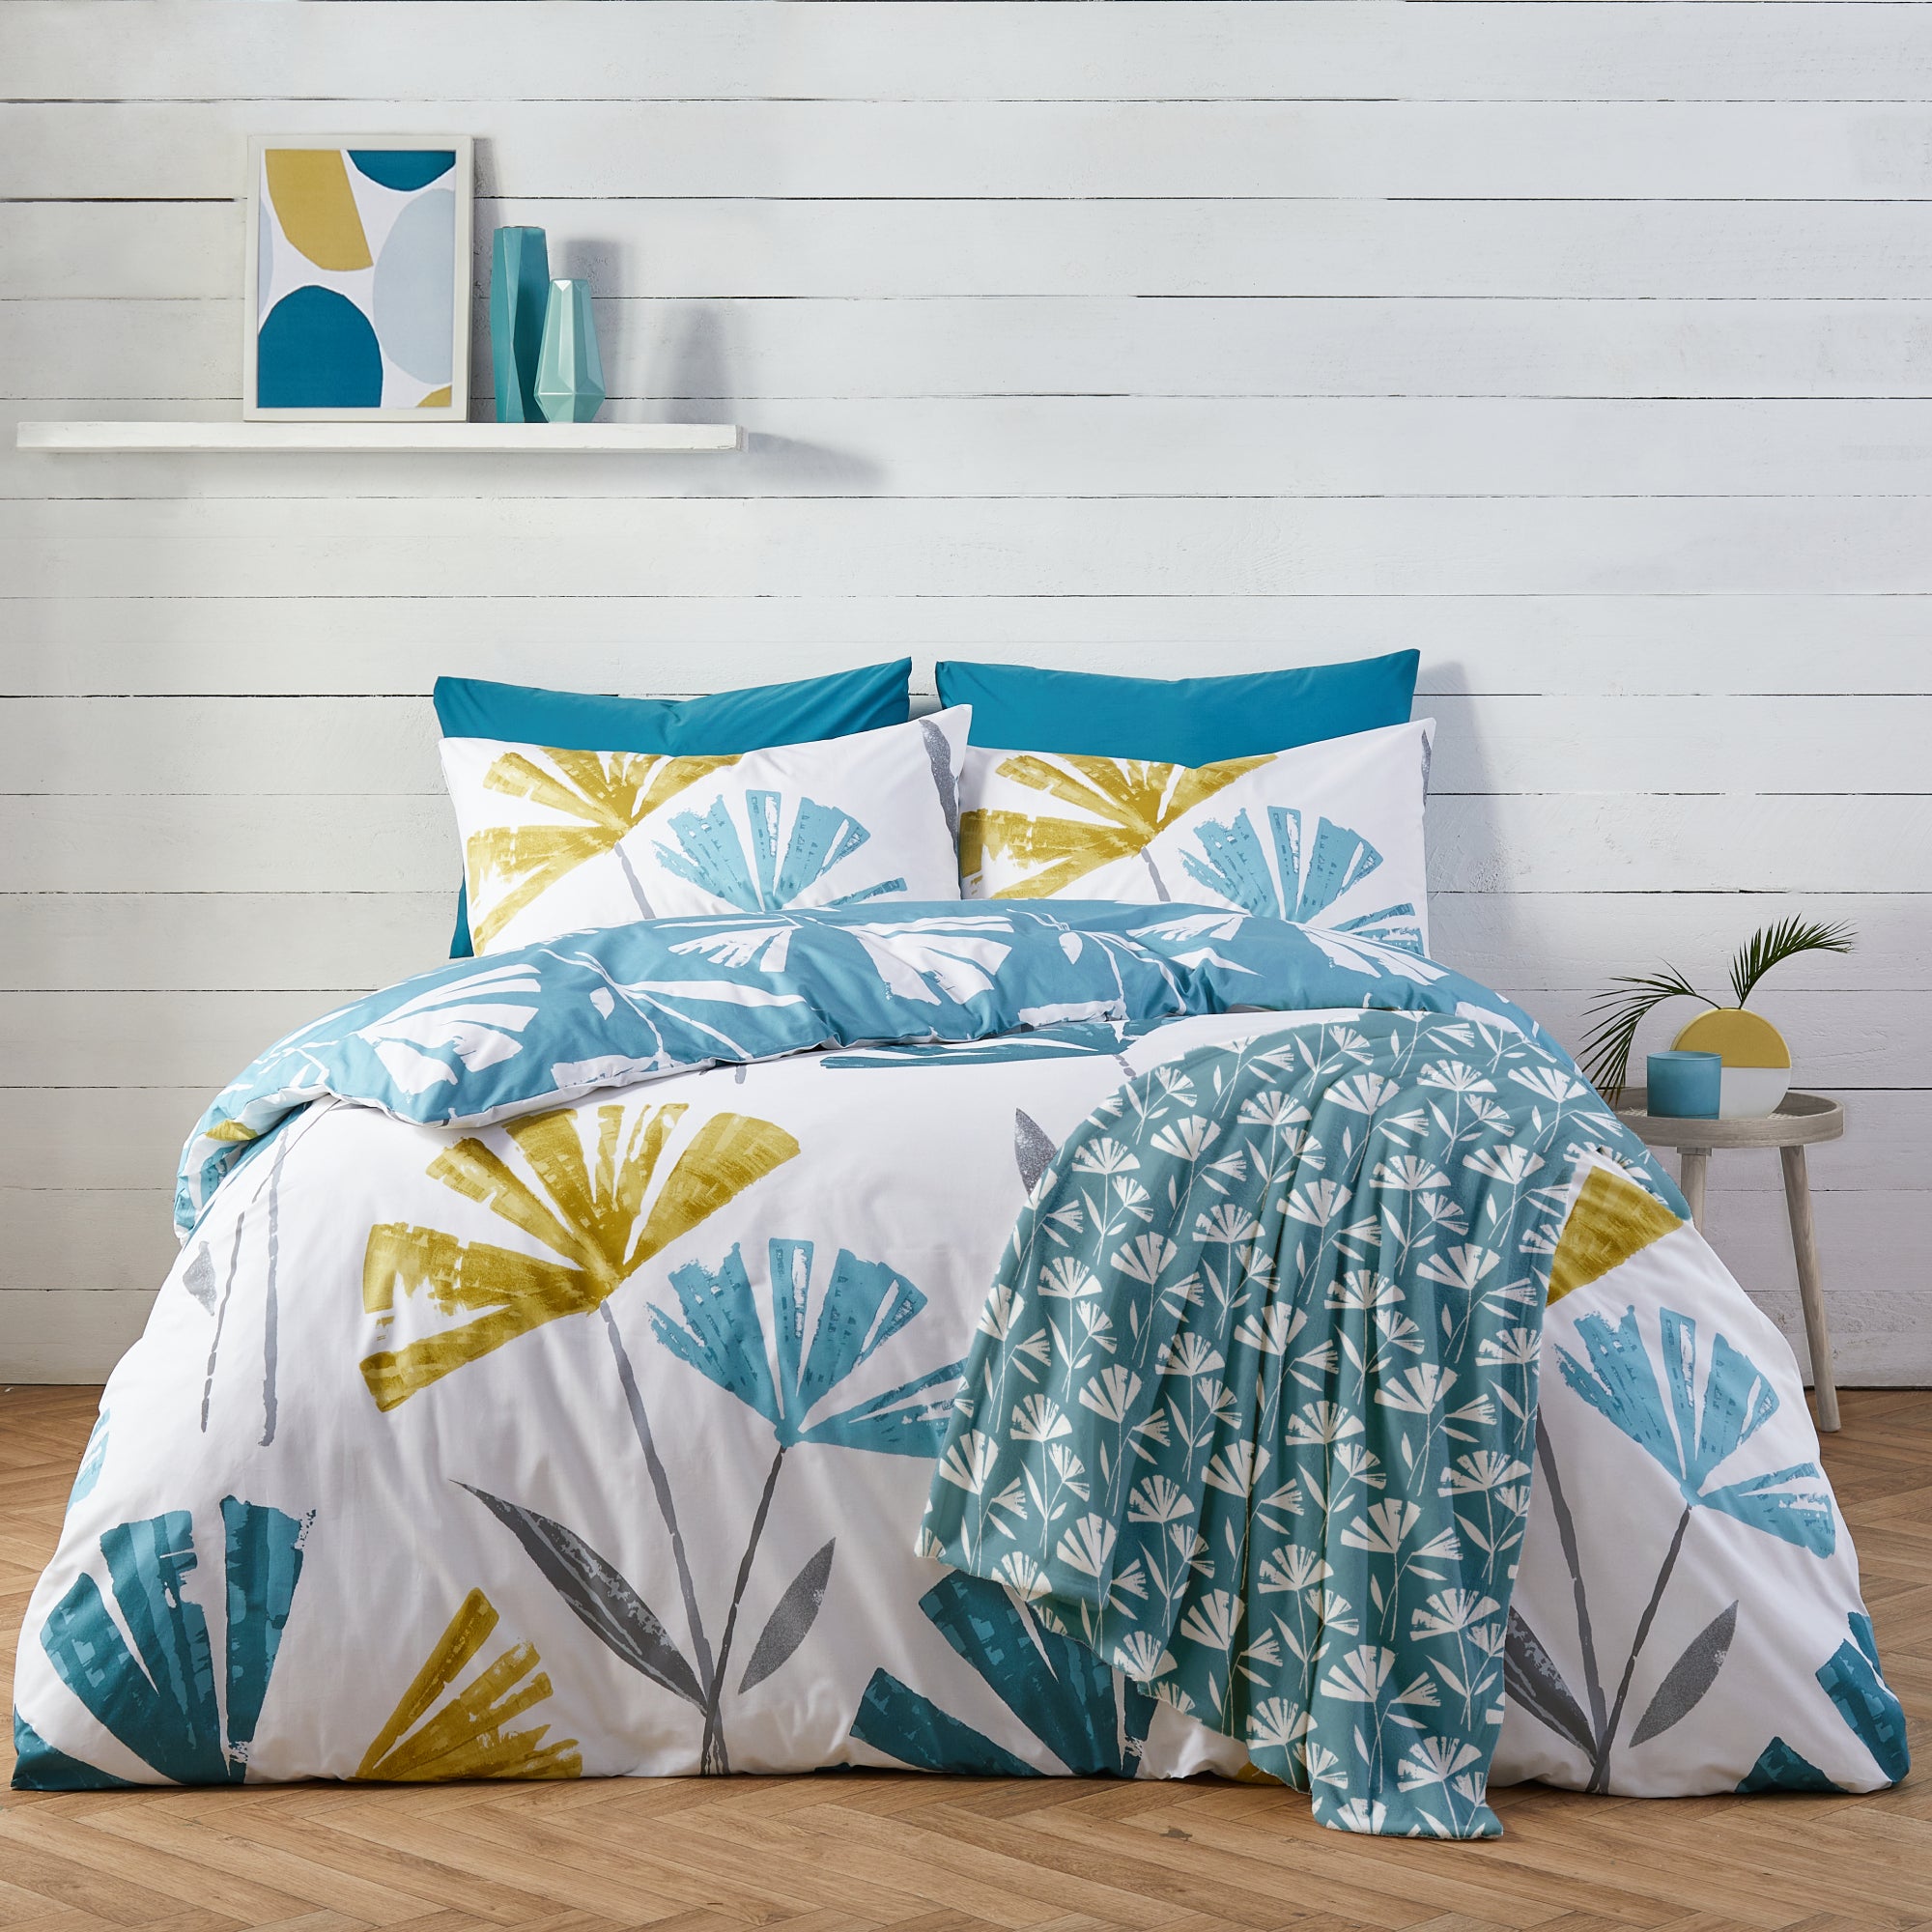 Throw Alma by Fusion in Teal